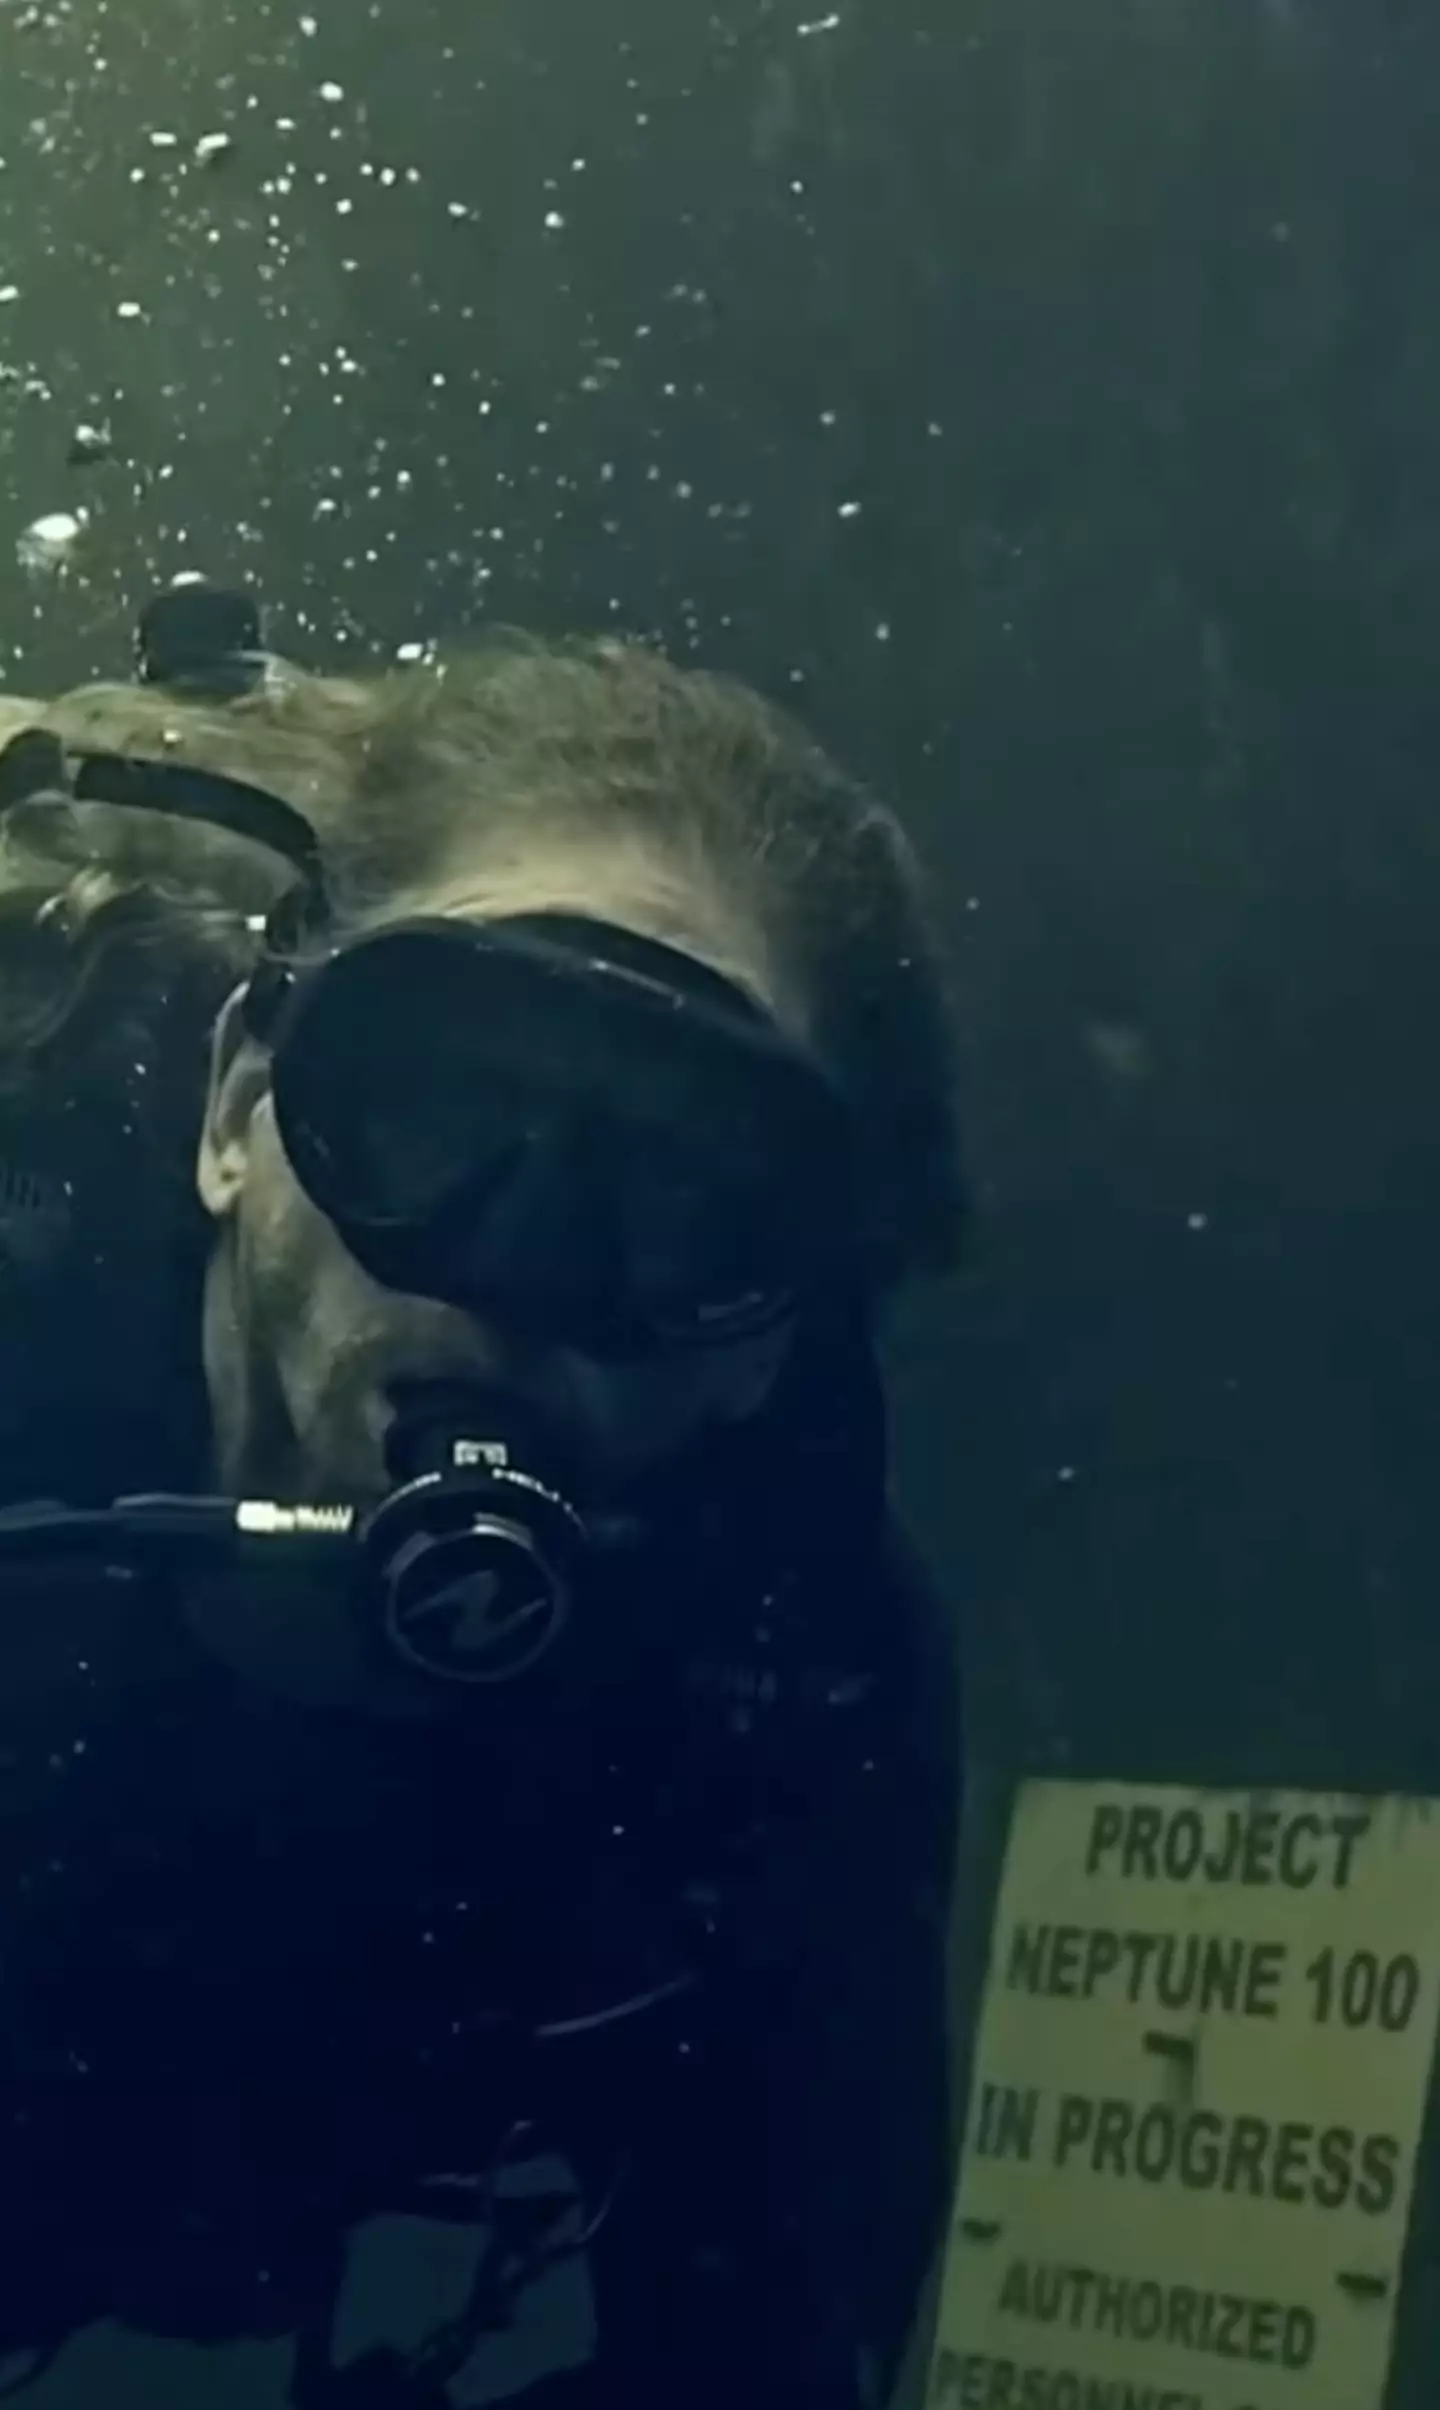 The retired U.S. naval officer is doing experiments to see how his body reacts to pressure underwater.